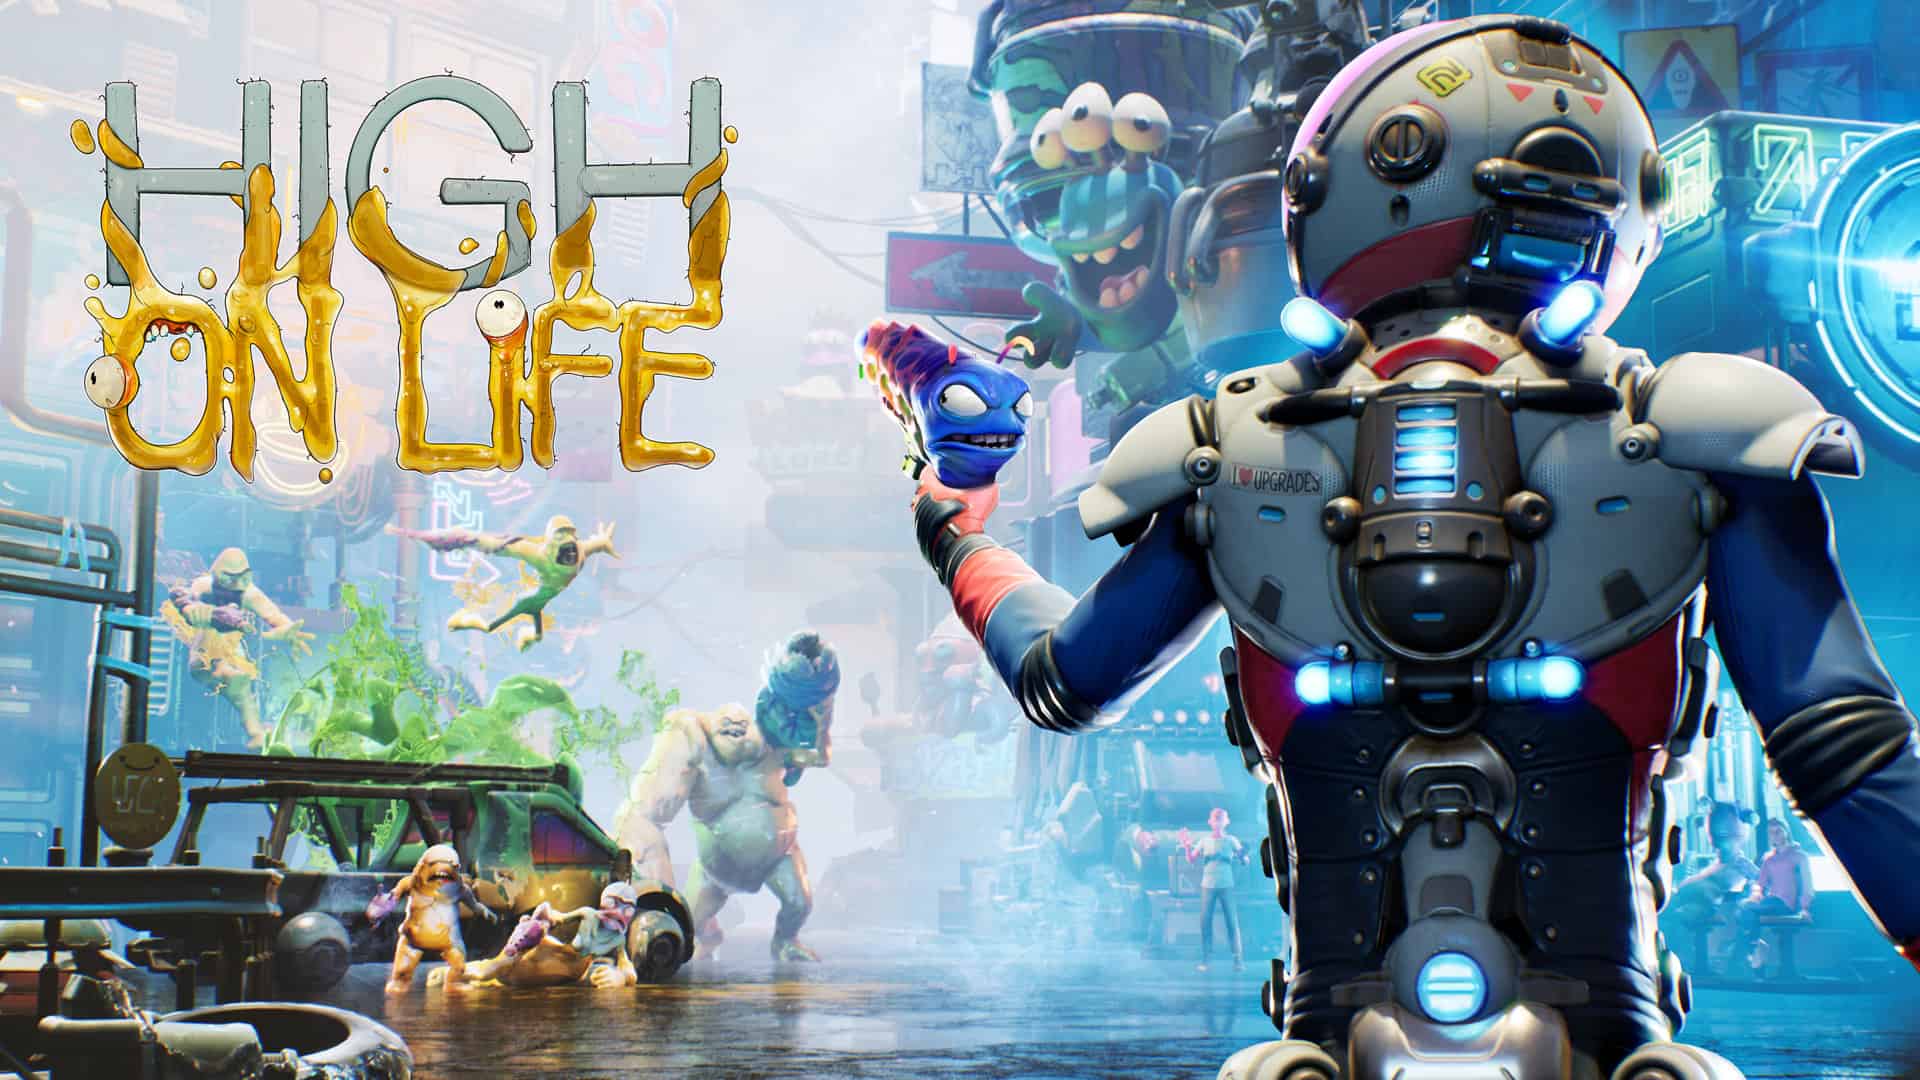 High on Life has been delayed to December